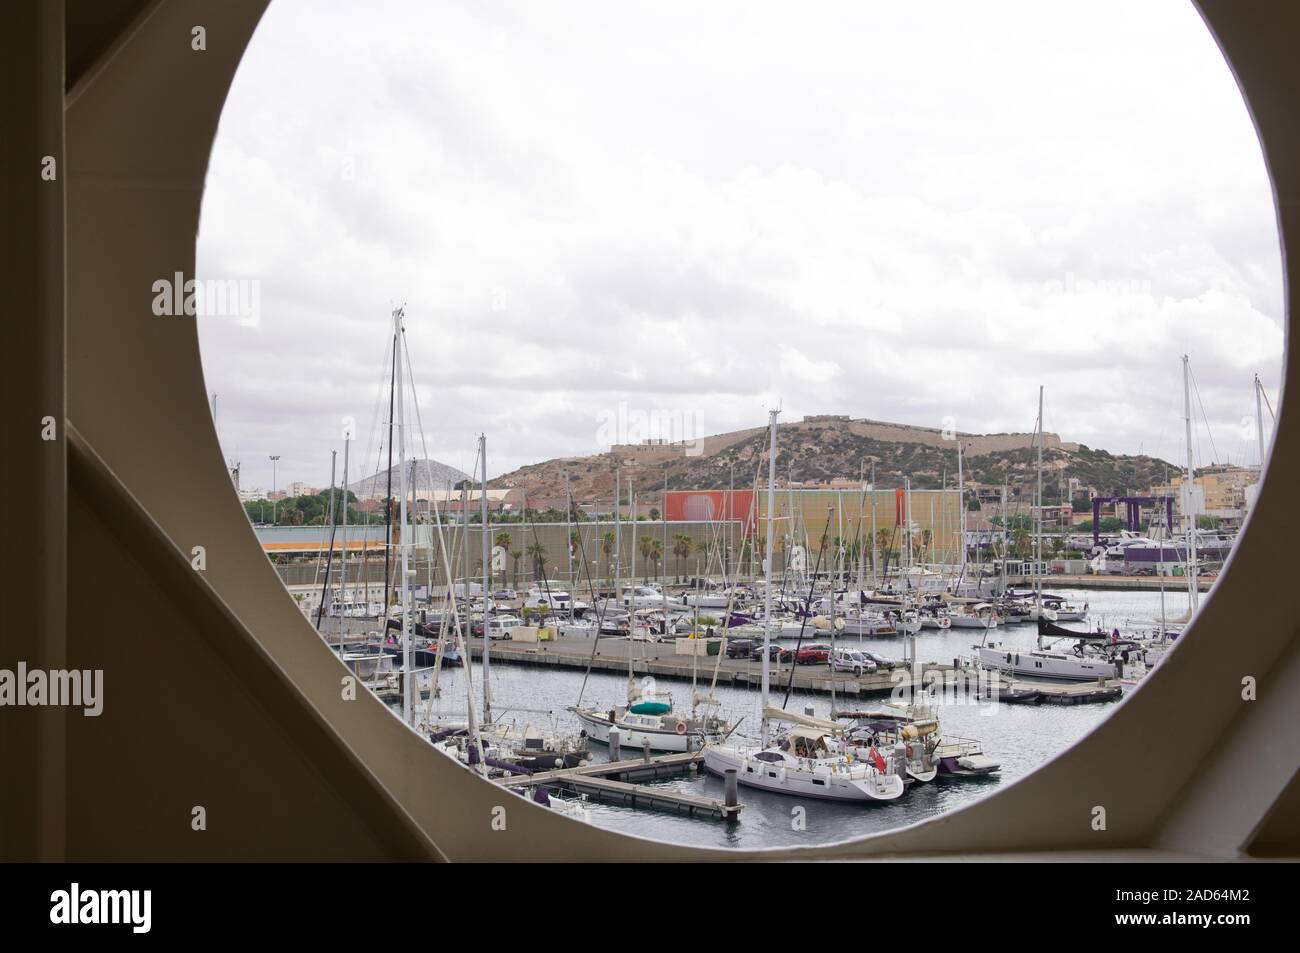 Port hole with view of harbor Stock Photo